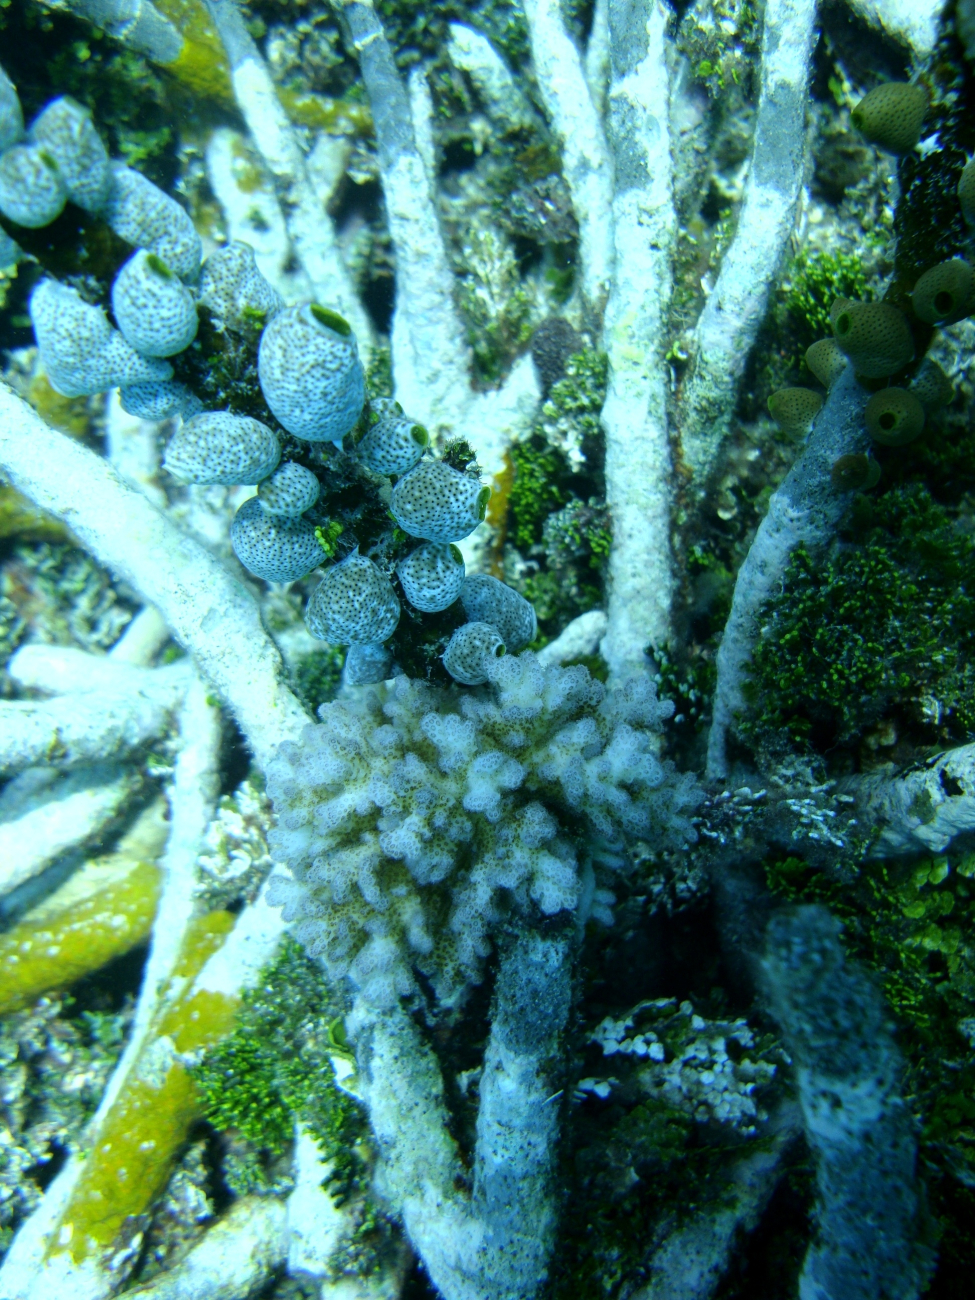 Dead staghorn coral with attached tunicates and algae